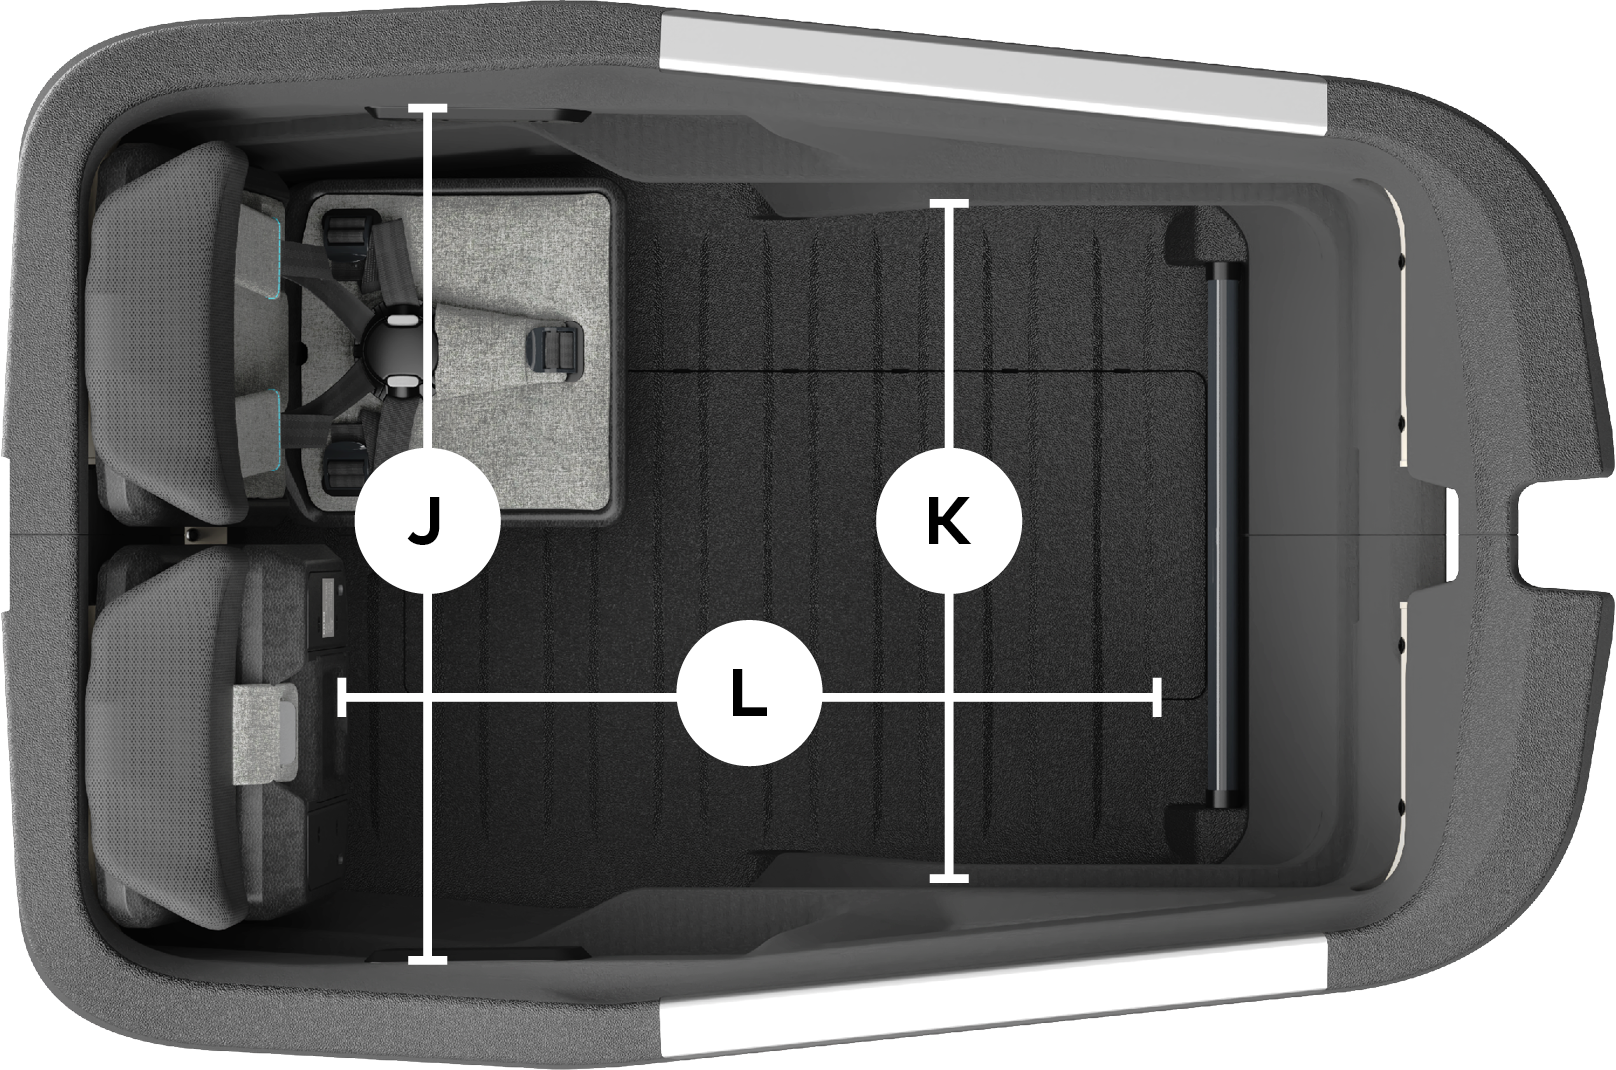 View from above on cargo box with mounted child seat
                            and drawn-in dimensions of the load compartment.
                            Width (front): 46 cm;
                             Width (rear): 56,5 cm;
                            Length: 61,4 cm